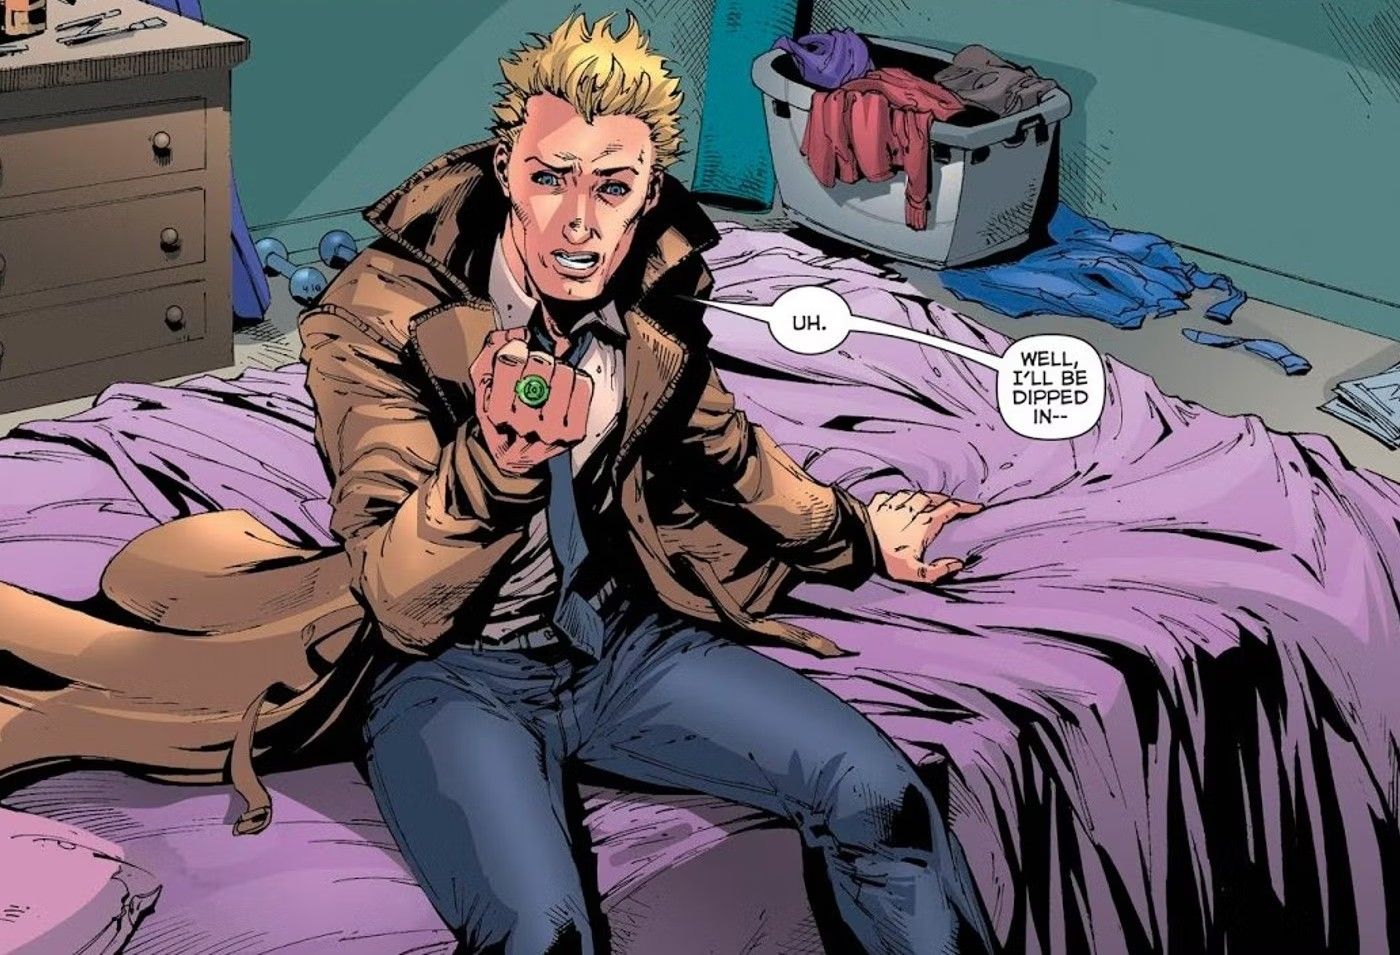 Comic book panel: John Constantine sits on a bed and wears a Green Lantern ring.